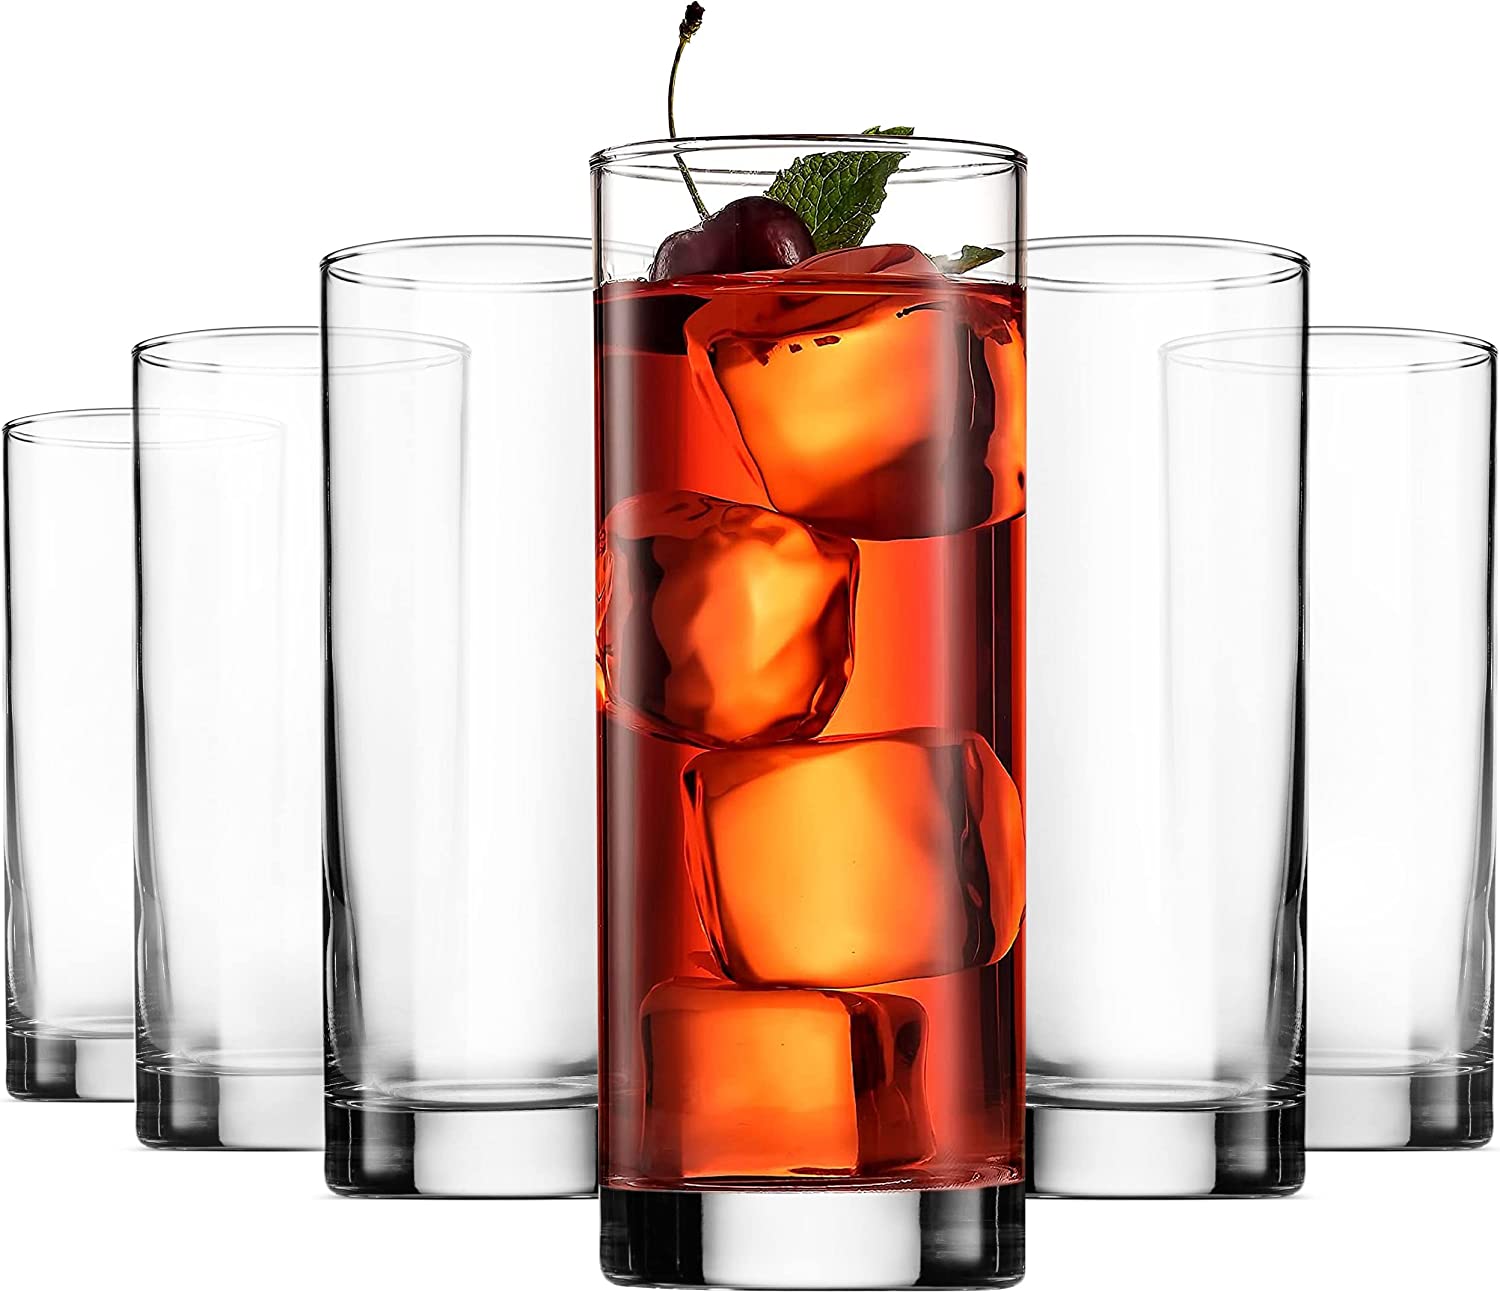 Drinking Glasses Set of 10 Highball Glass Cups By Glavers, Premium Glass